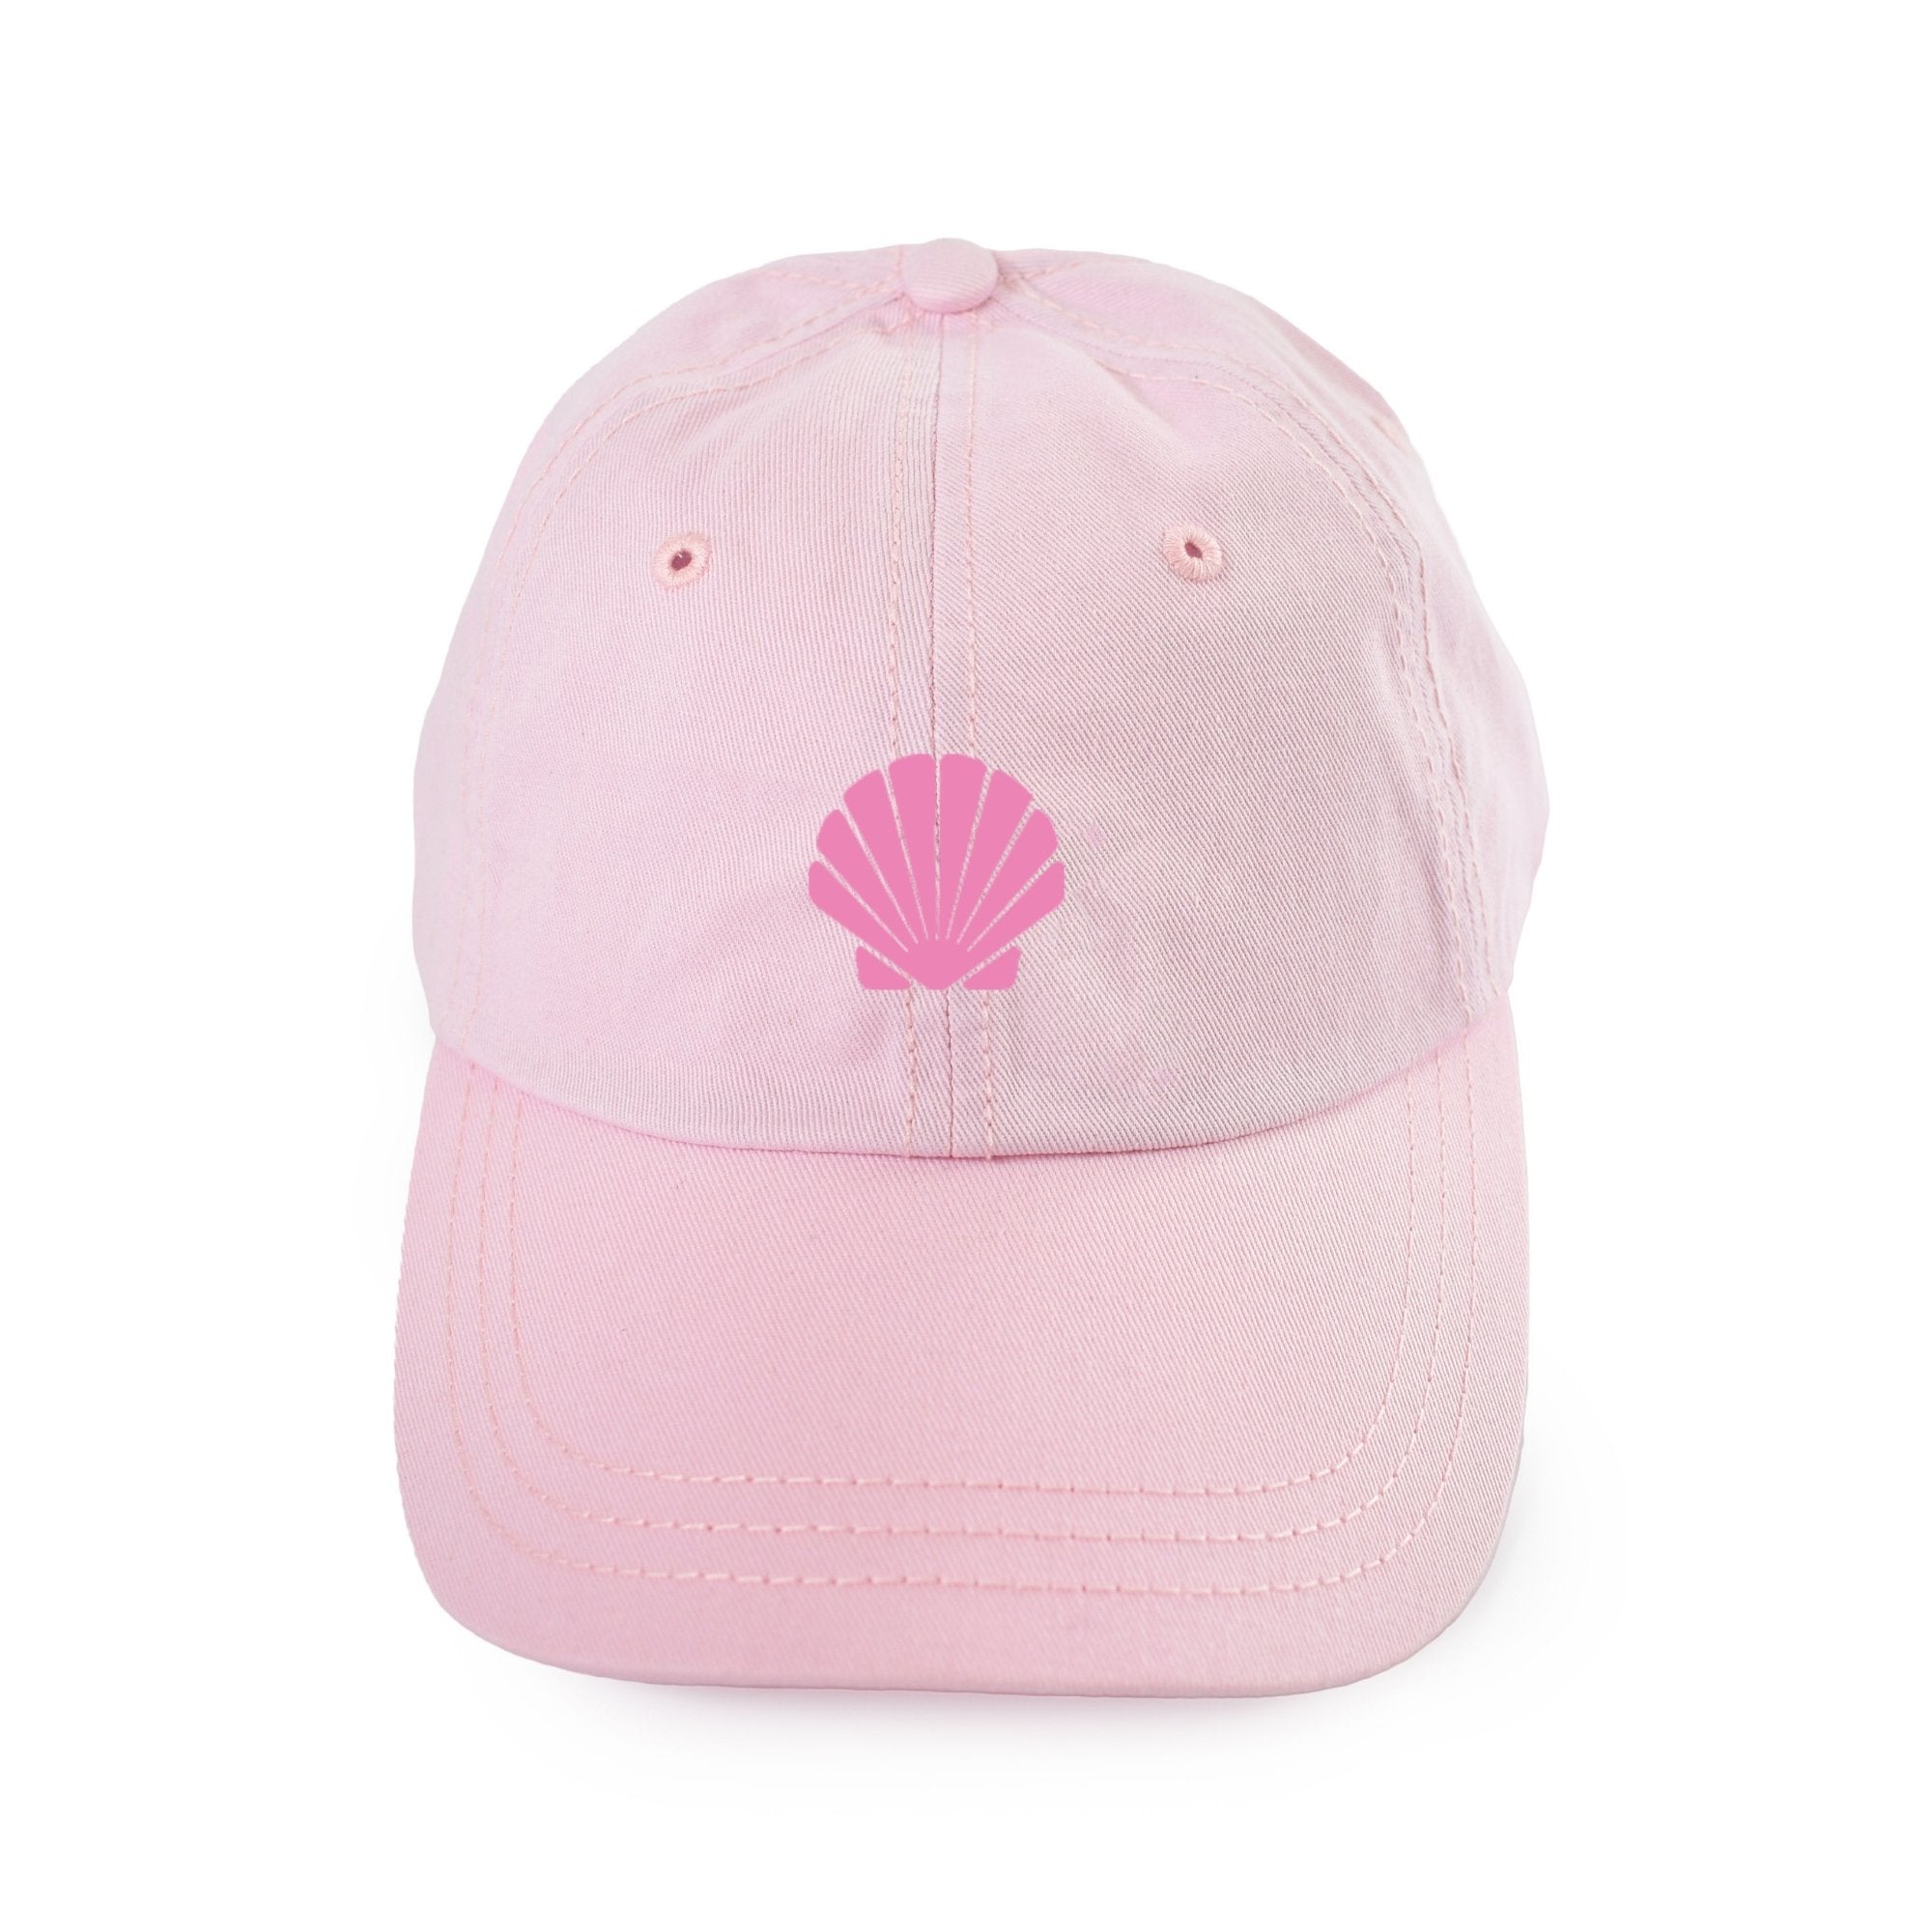 A pink baseball hat is customized with a pink seashell design.